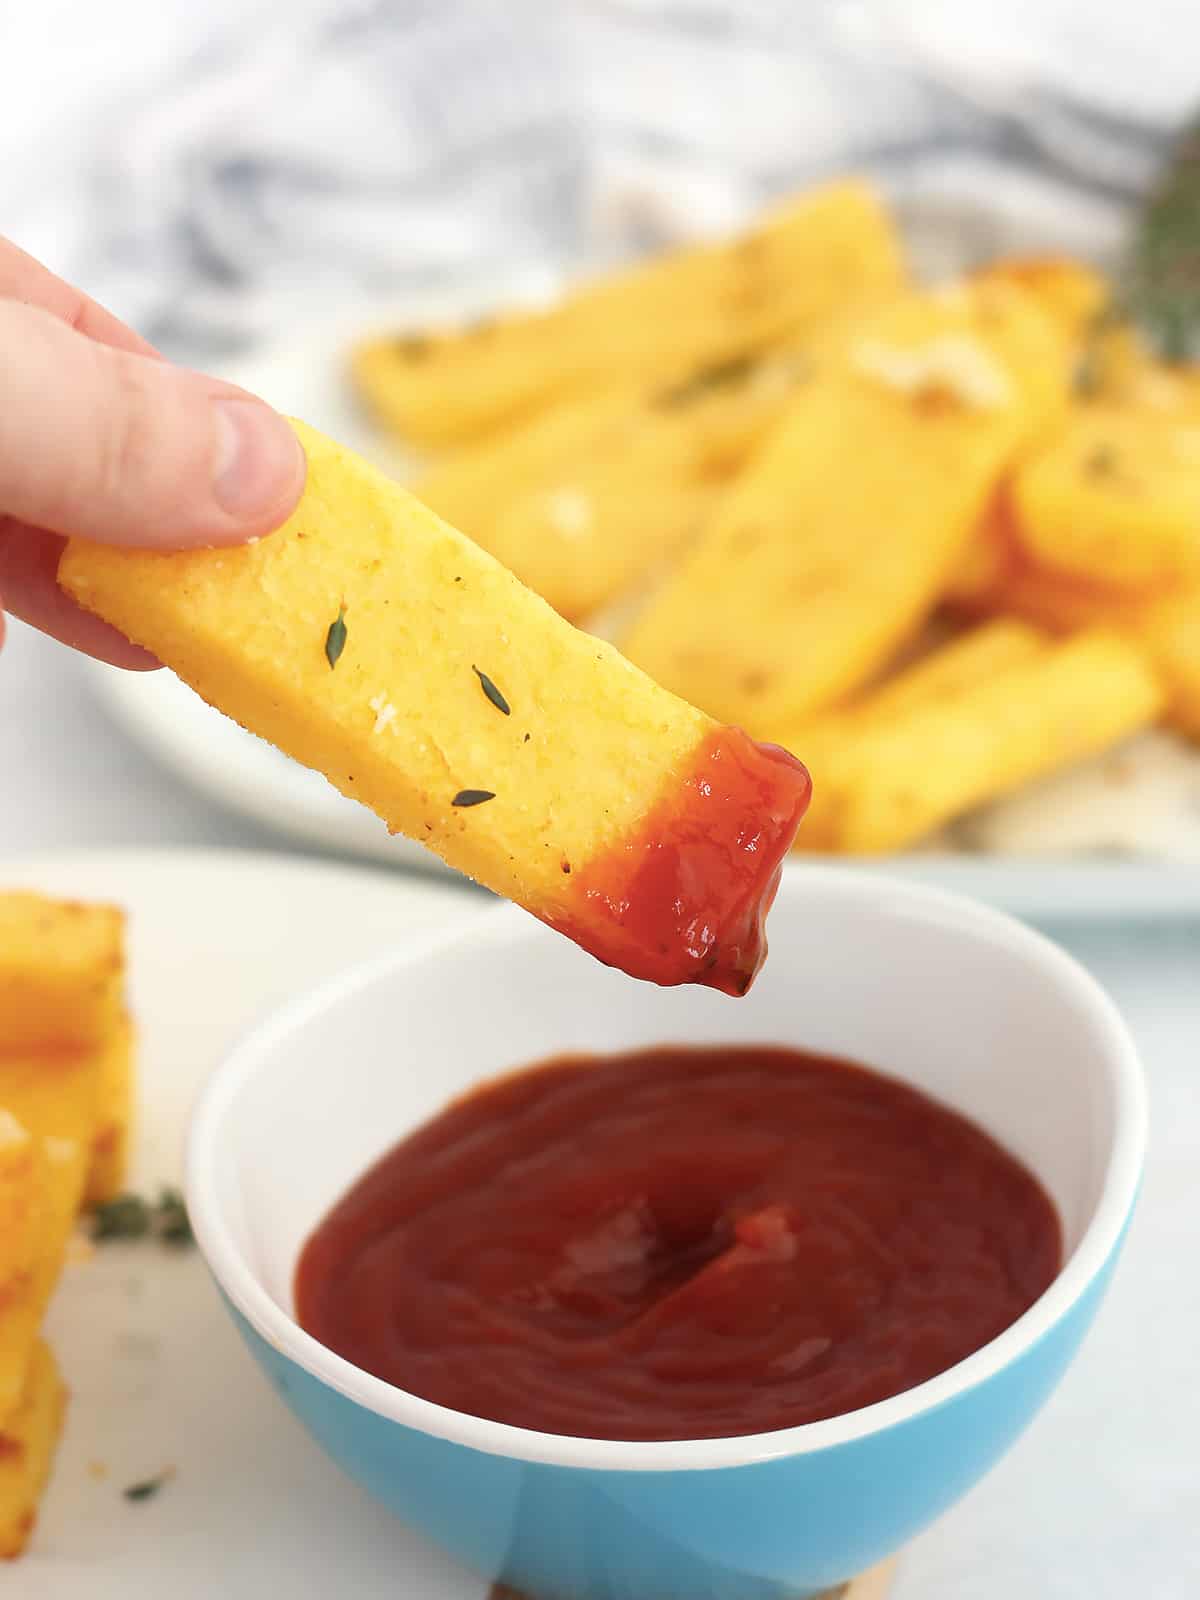 A polenta fry being dipped in a bowl of tomato ketchup.